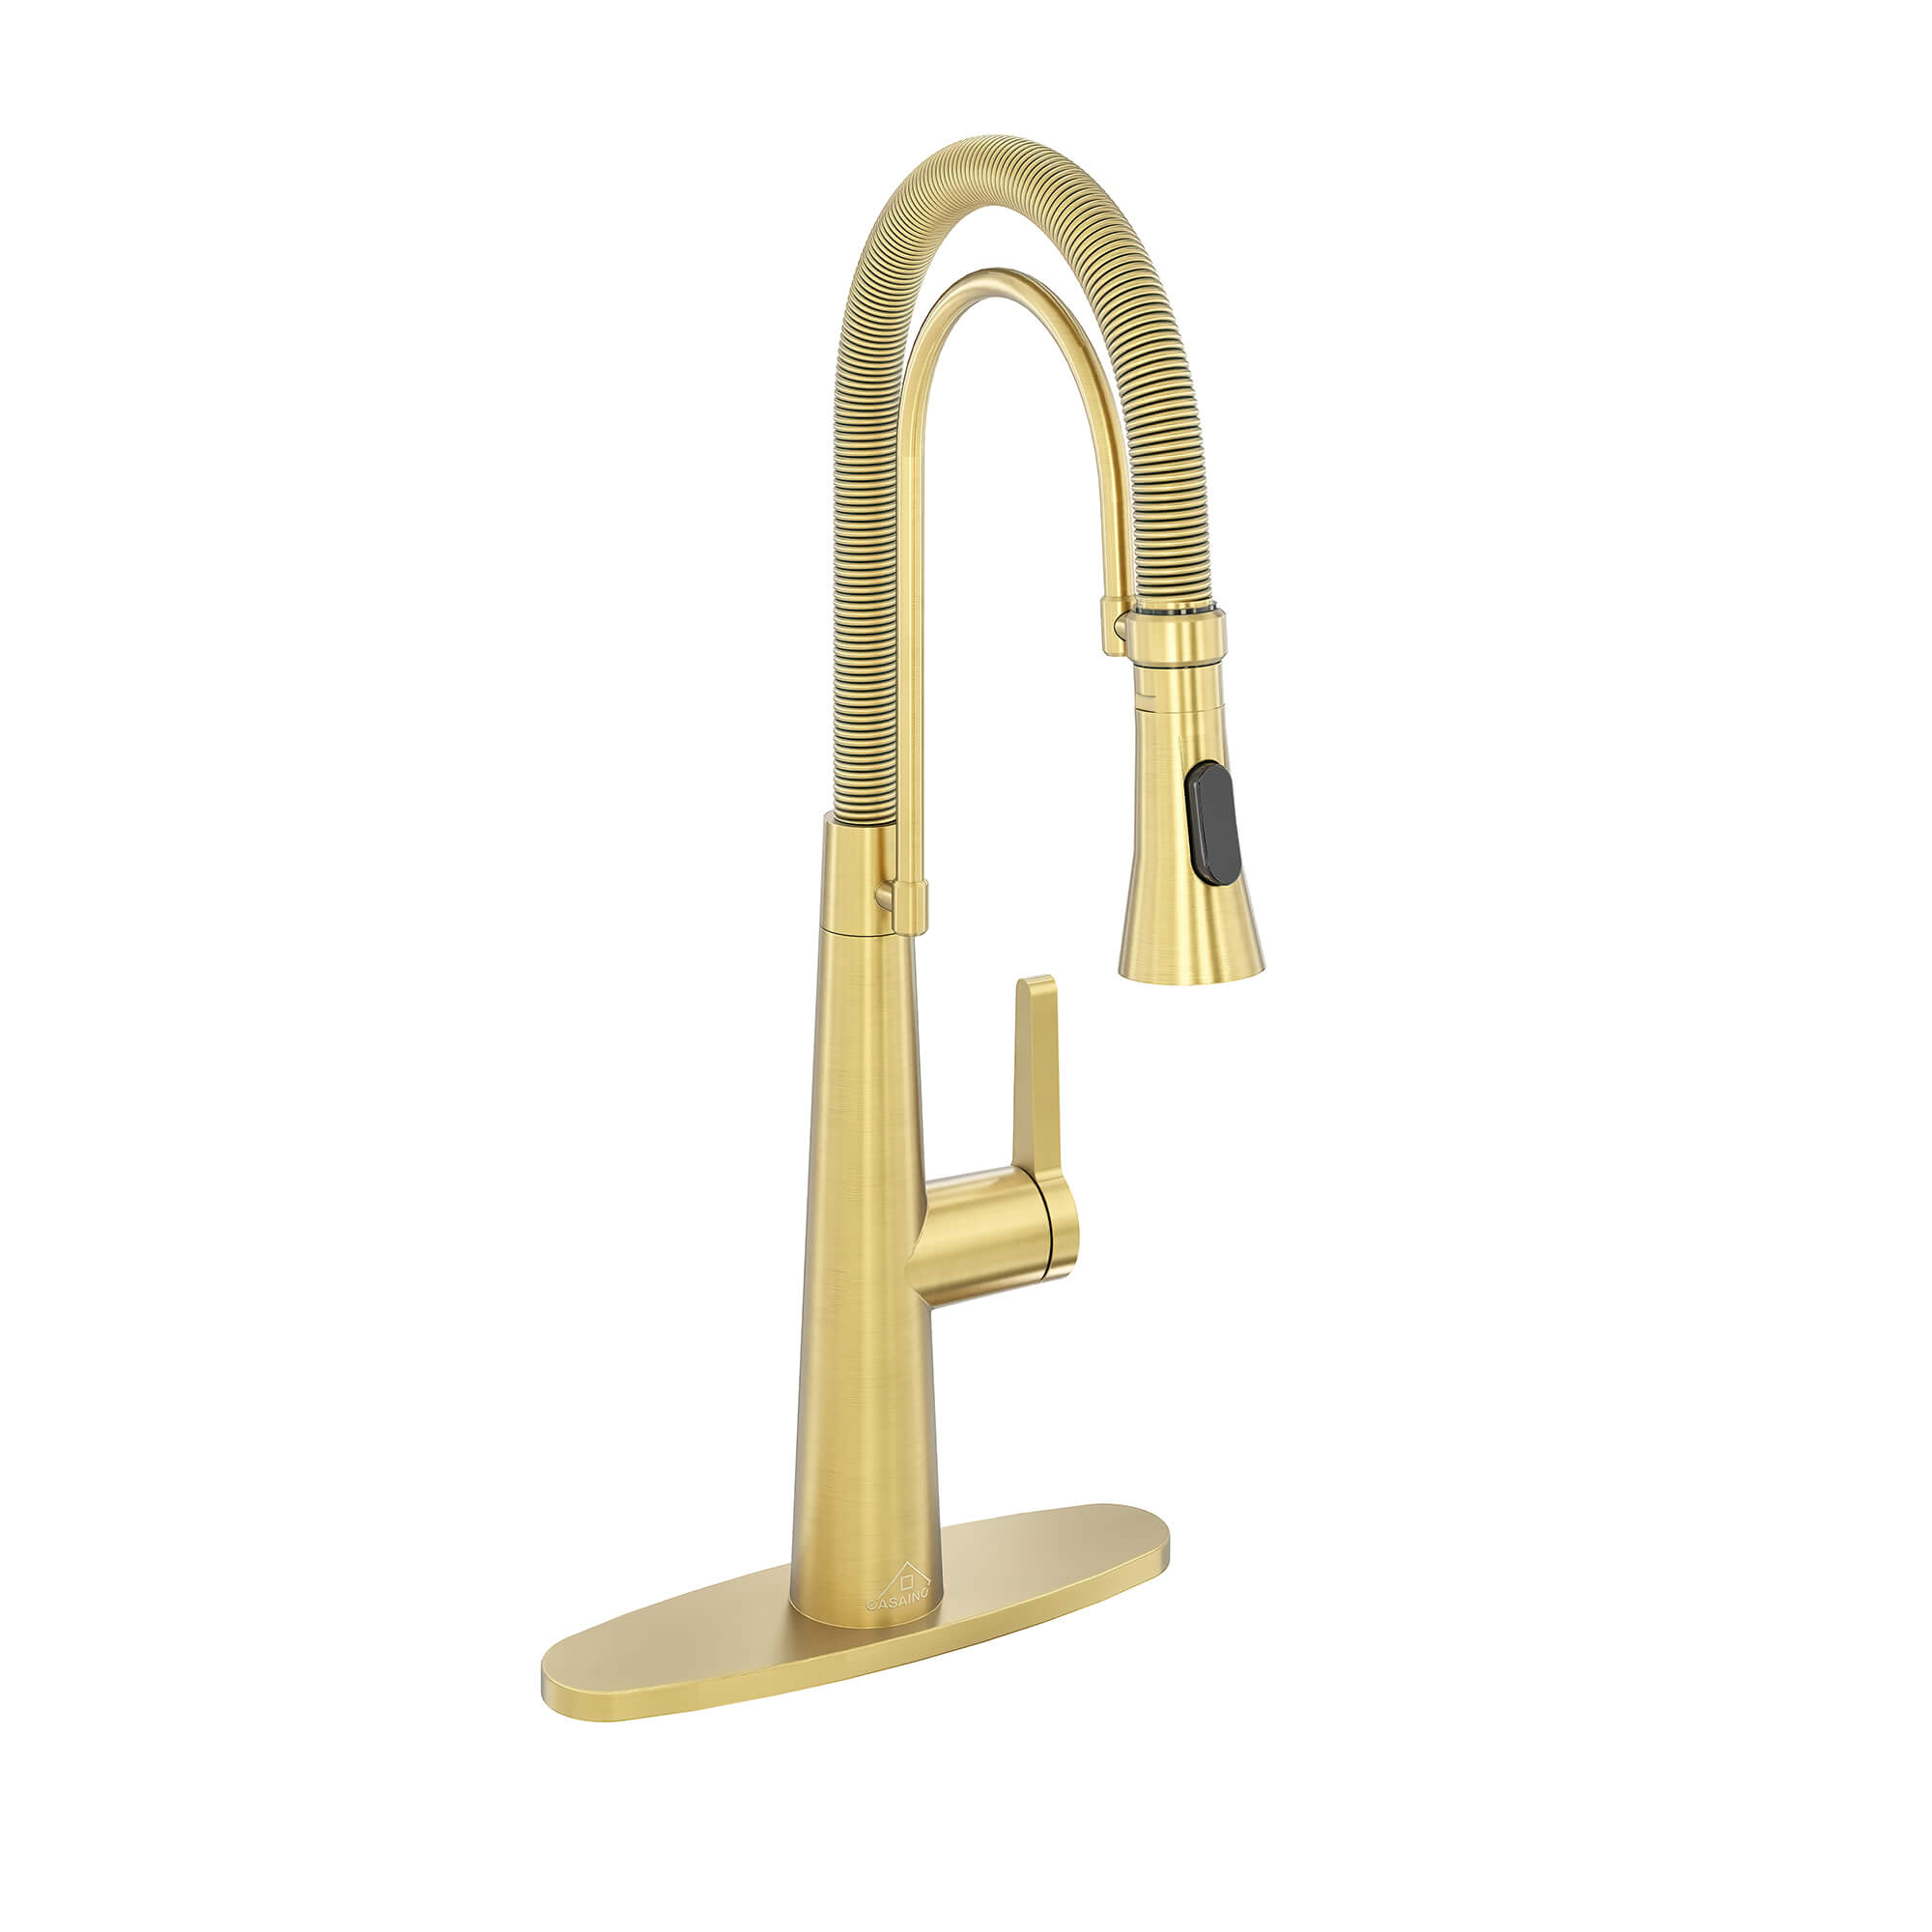 CASAINC 1.8GPM Two-function Spring Kitchen Faucet in Brushed Nickel/Gold and Black-CASAINC